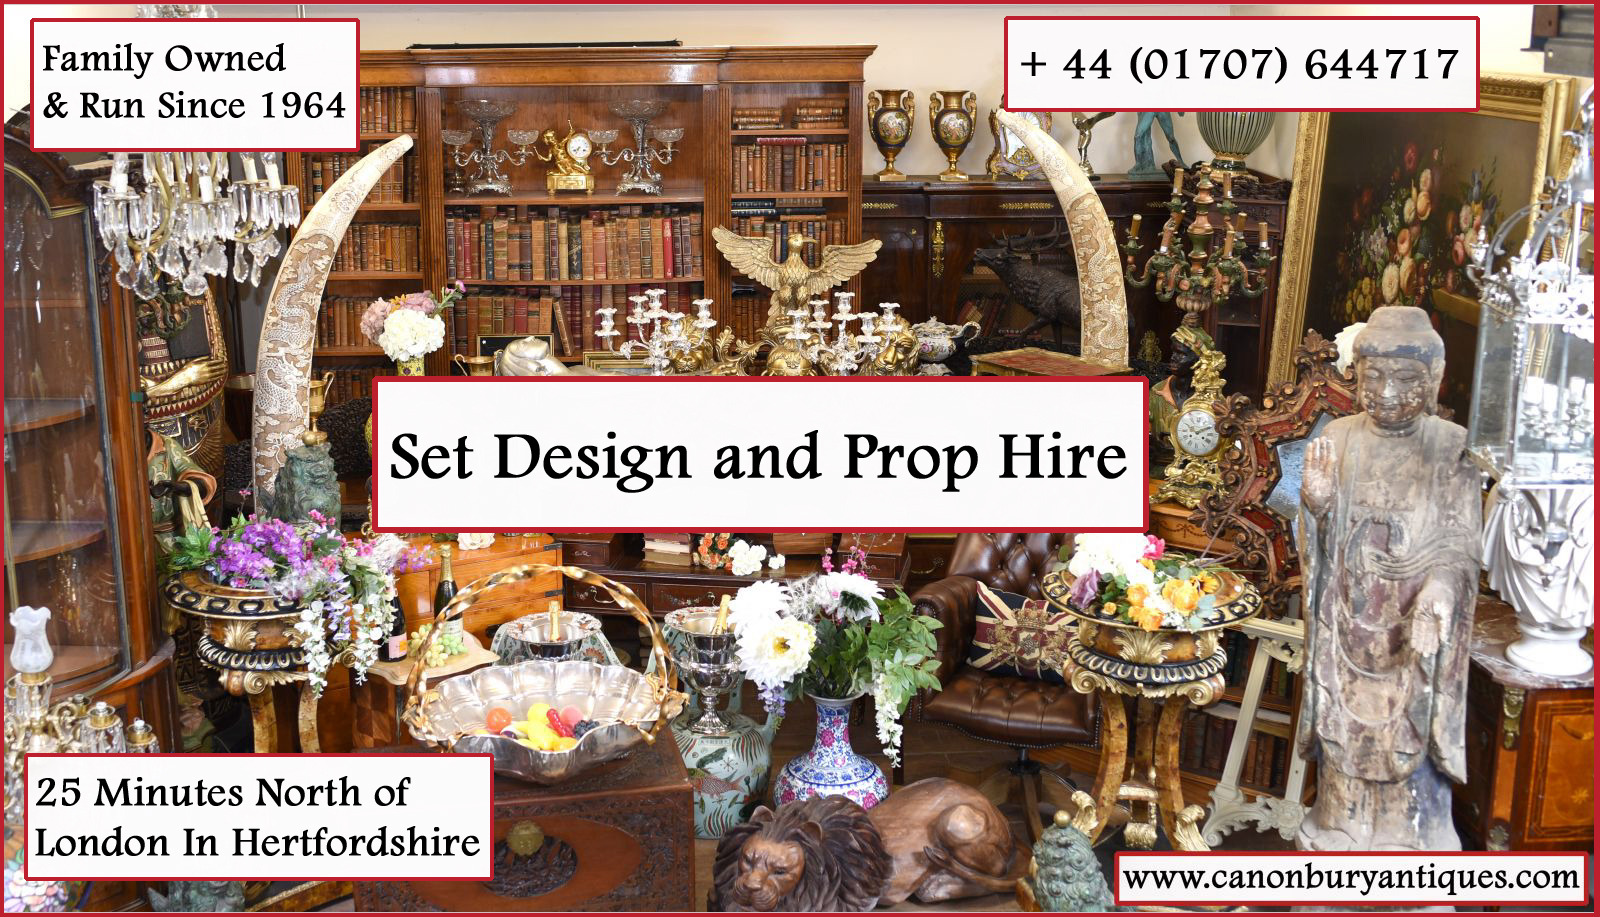 Herfordshire Prop Hire and Set design services